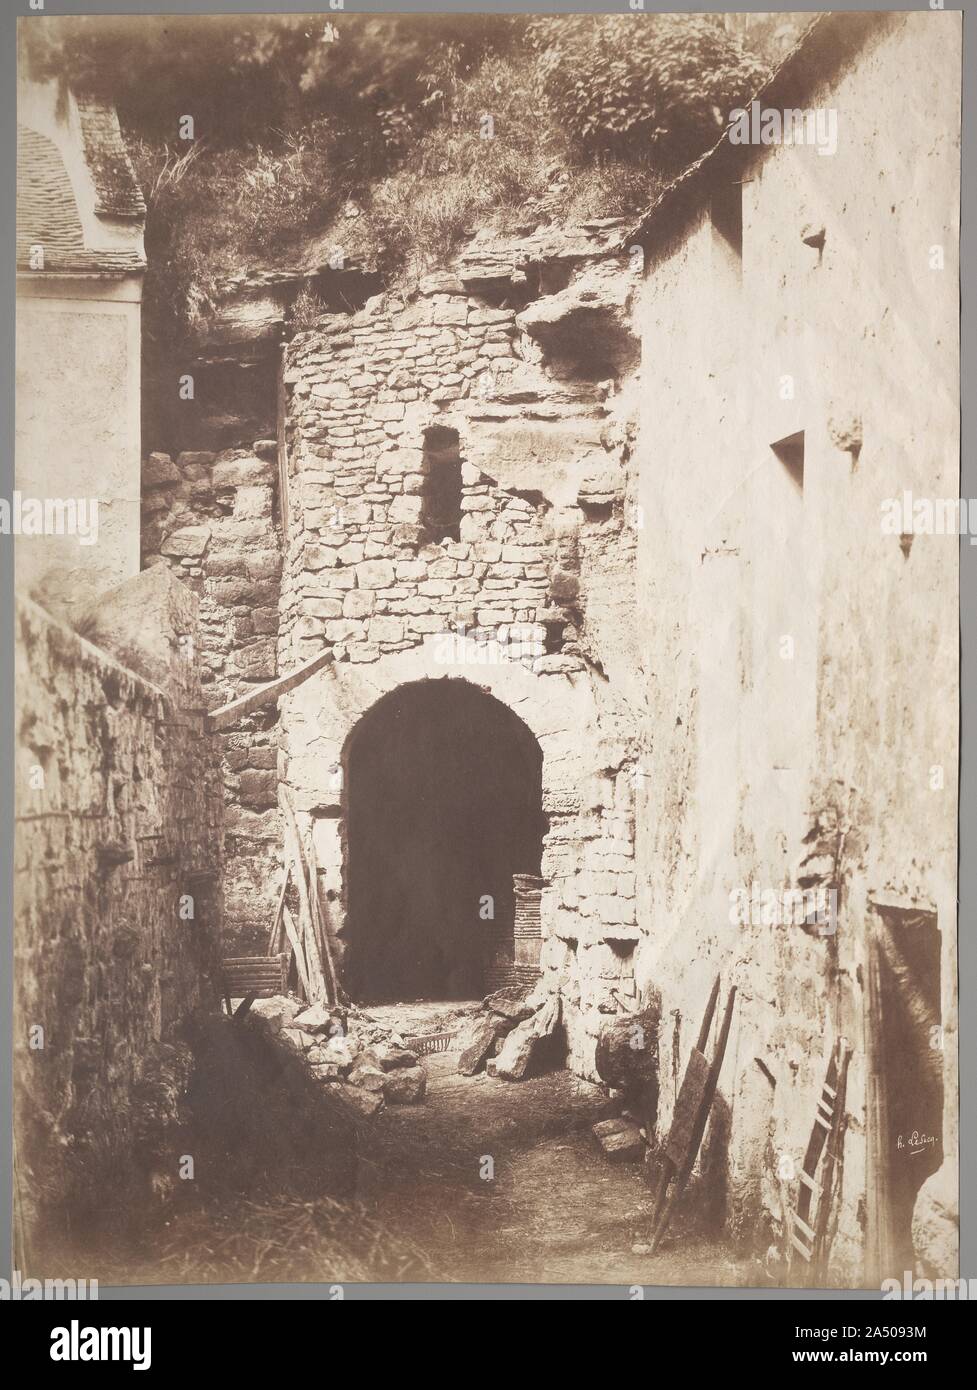 Behind the Troglodyte Farm, c. 1853. Trained as a painter, Le Secq was drawn to the new invention of photography in the late 1840s. He became one of the most gifted early photographers to record architecture and sculpture before his brief, illustrious career ended in 1856. Only one of two known prints, this large-scale image, exceptional for the period and process, belongs to a small group of photographs of troglodyte dwellings in western France near the Loire River. In the mid 19th century, artists of all media were attracted to rustic domestic scenes for both their picturesque qualities and Stock Photo